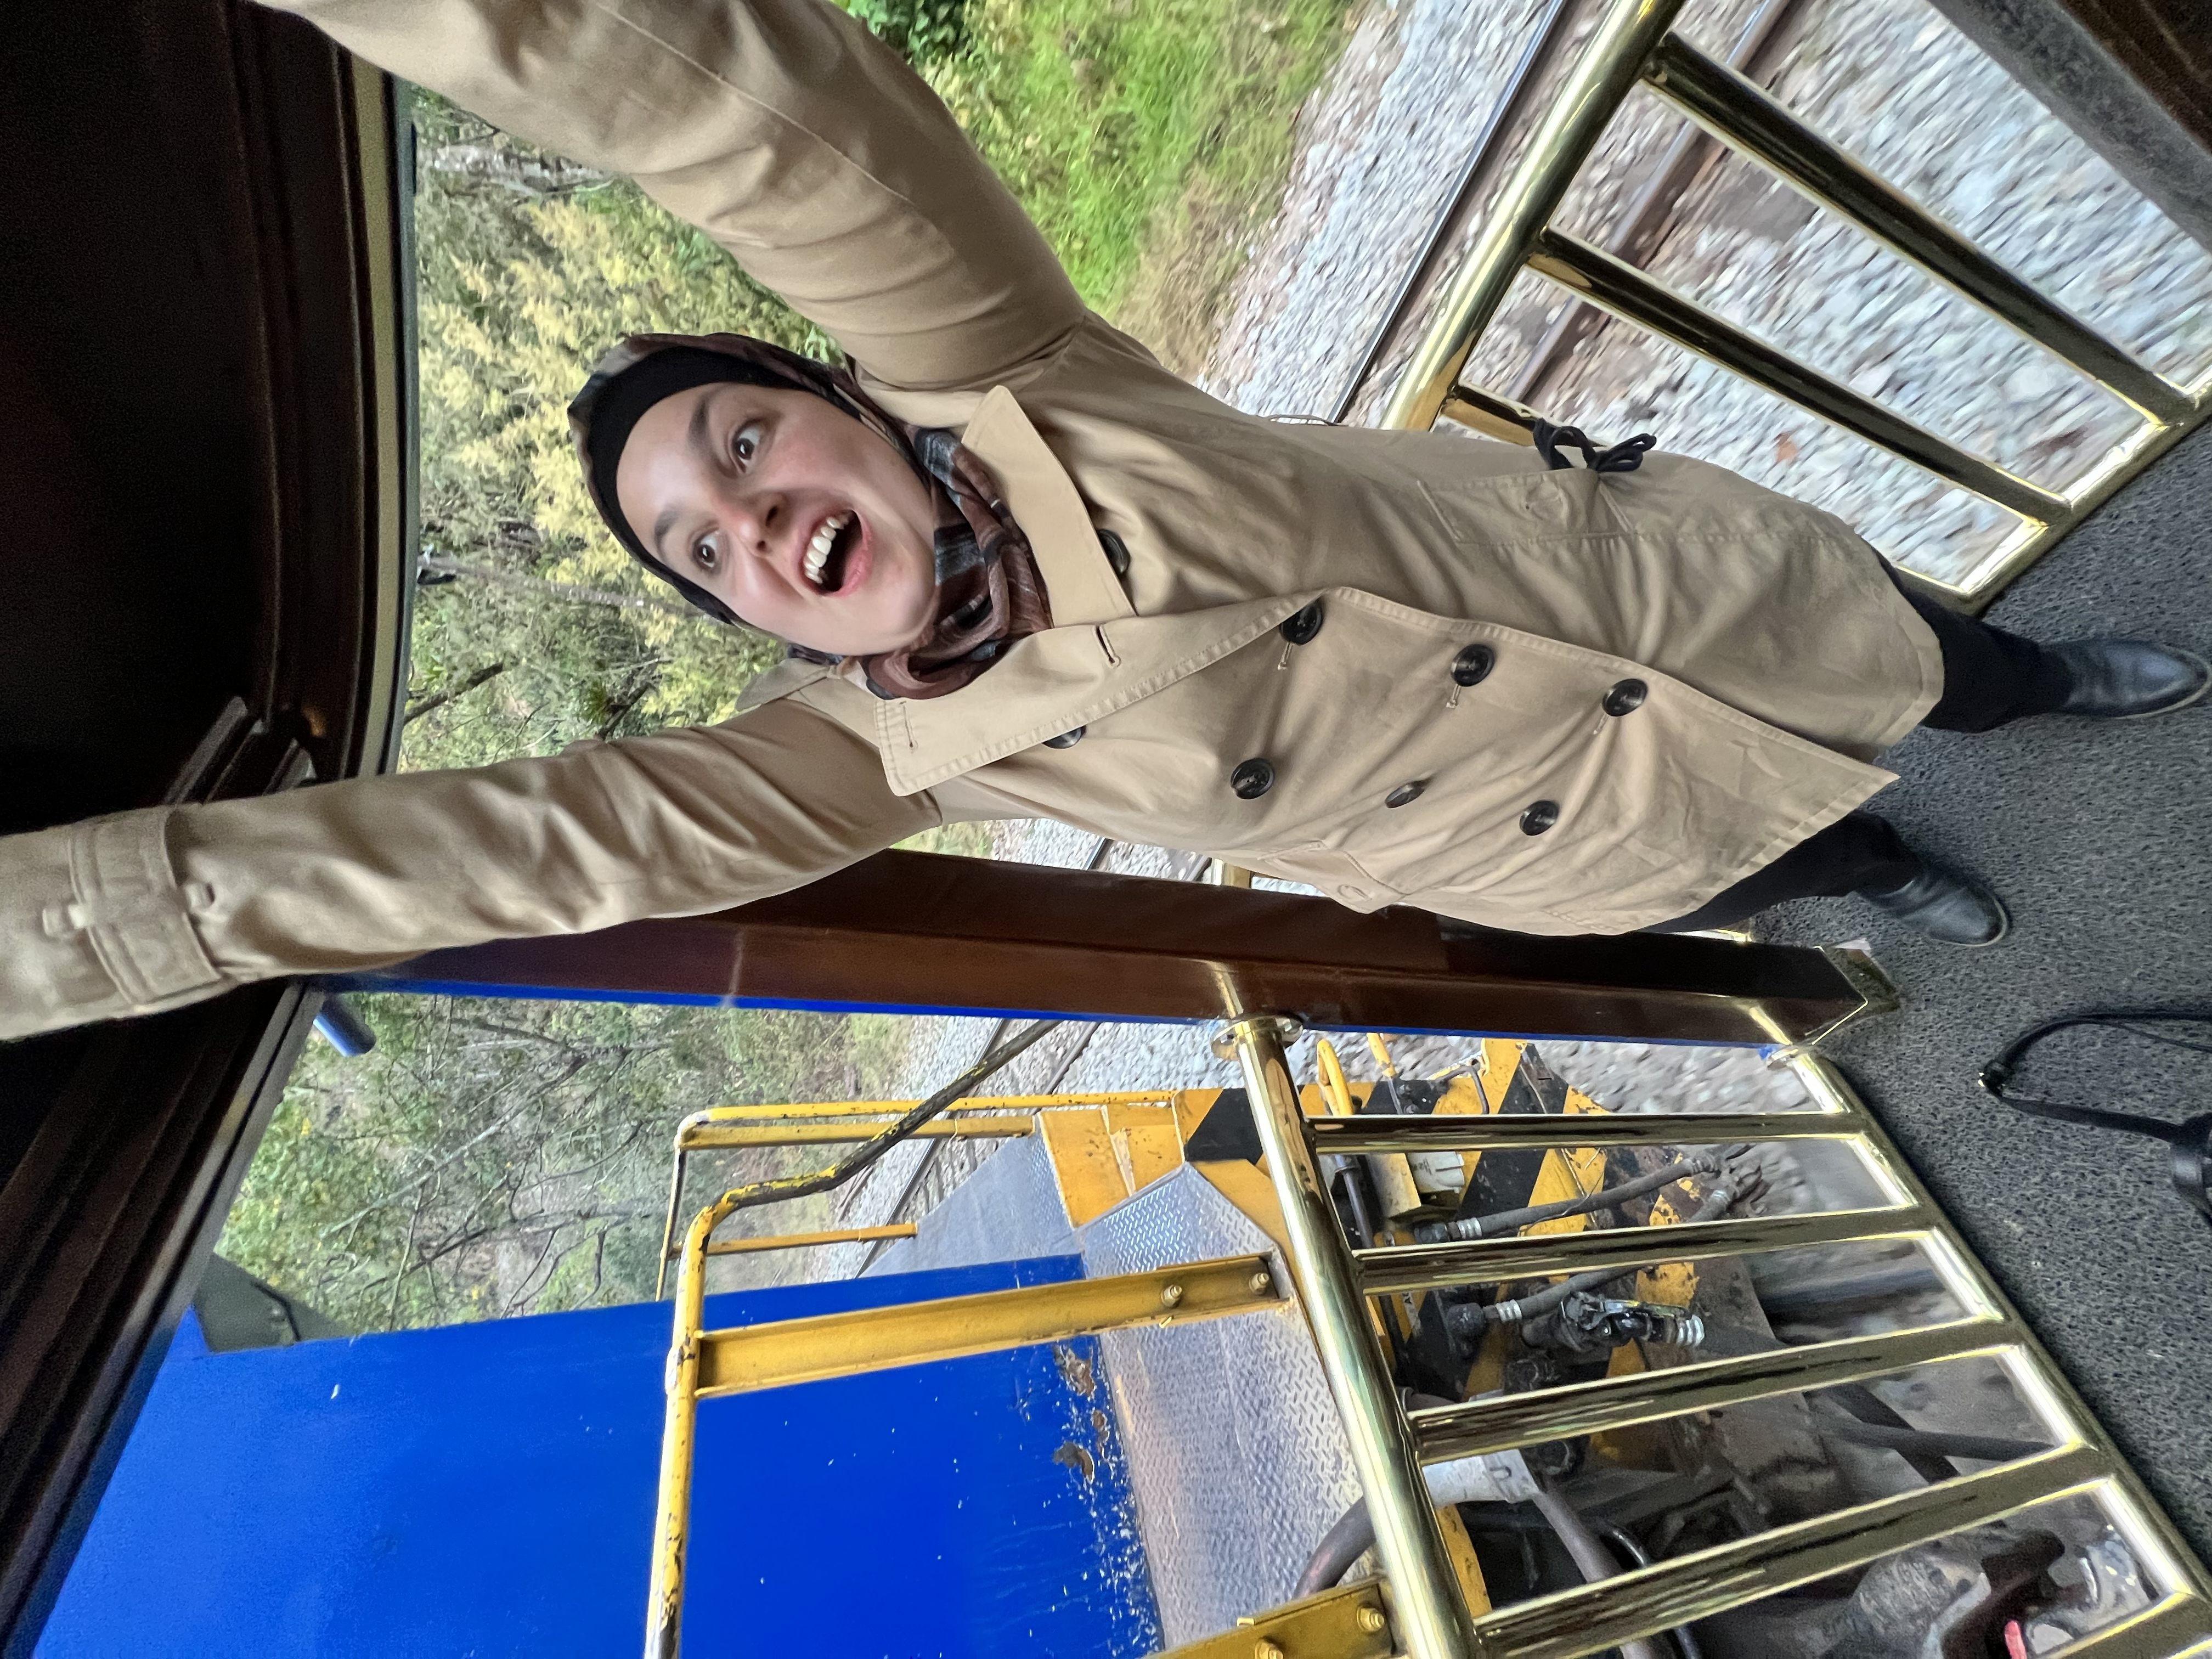 A picture of Mona being excited in front of the camera. She is standing inside a train compartment and she is not holding her walking stick. She is grabbing on to  something on the top to support herself.
					The picture shows a bit of motion blur, which means the picture was taken when the train was moving at a high speed.